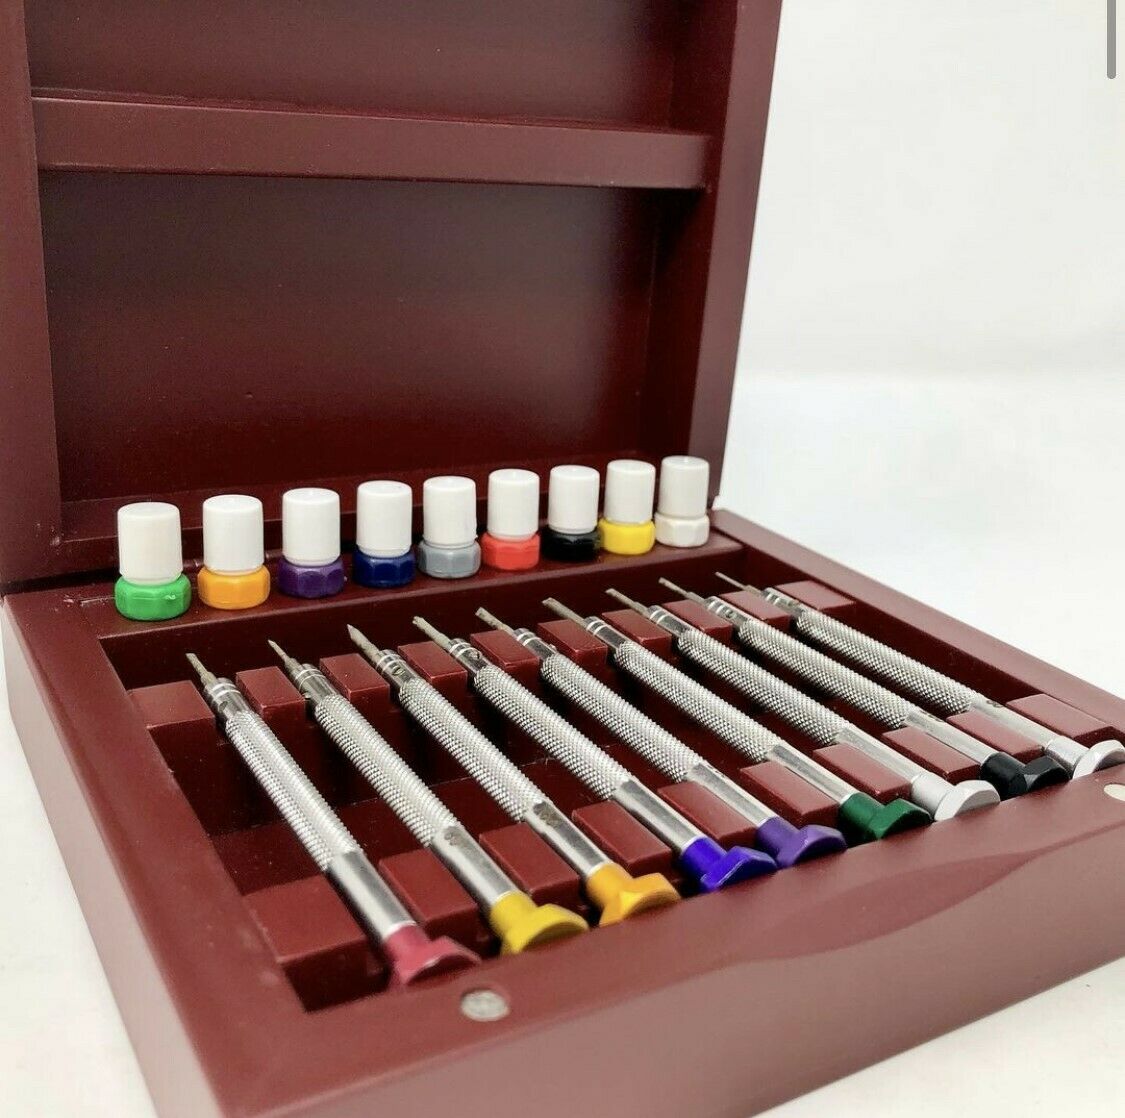 Euro Pro Screw Driver Set of 9 in Wood Box with Anodised Colour Coded Heads 194007455069 5 - Maddisons UK